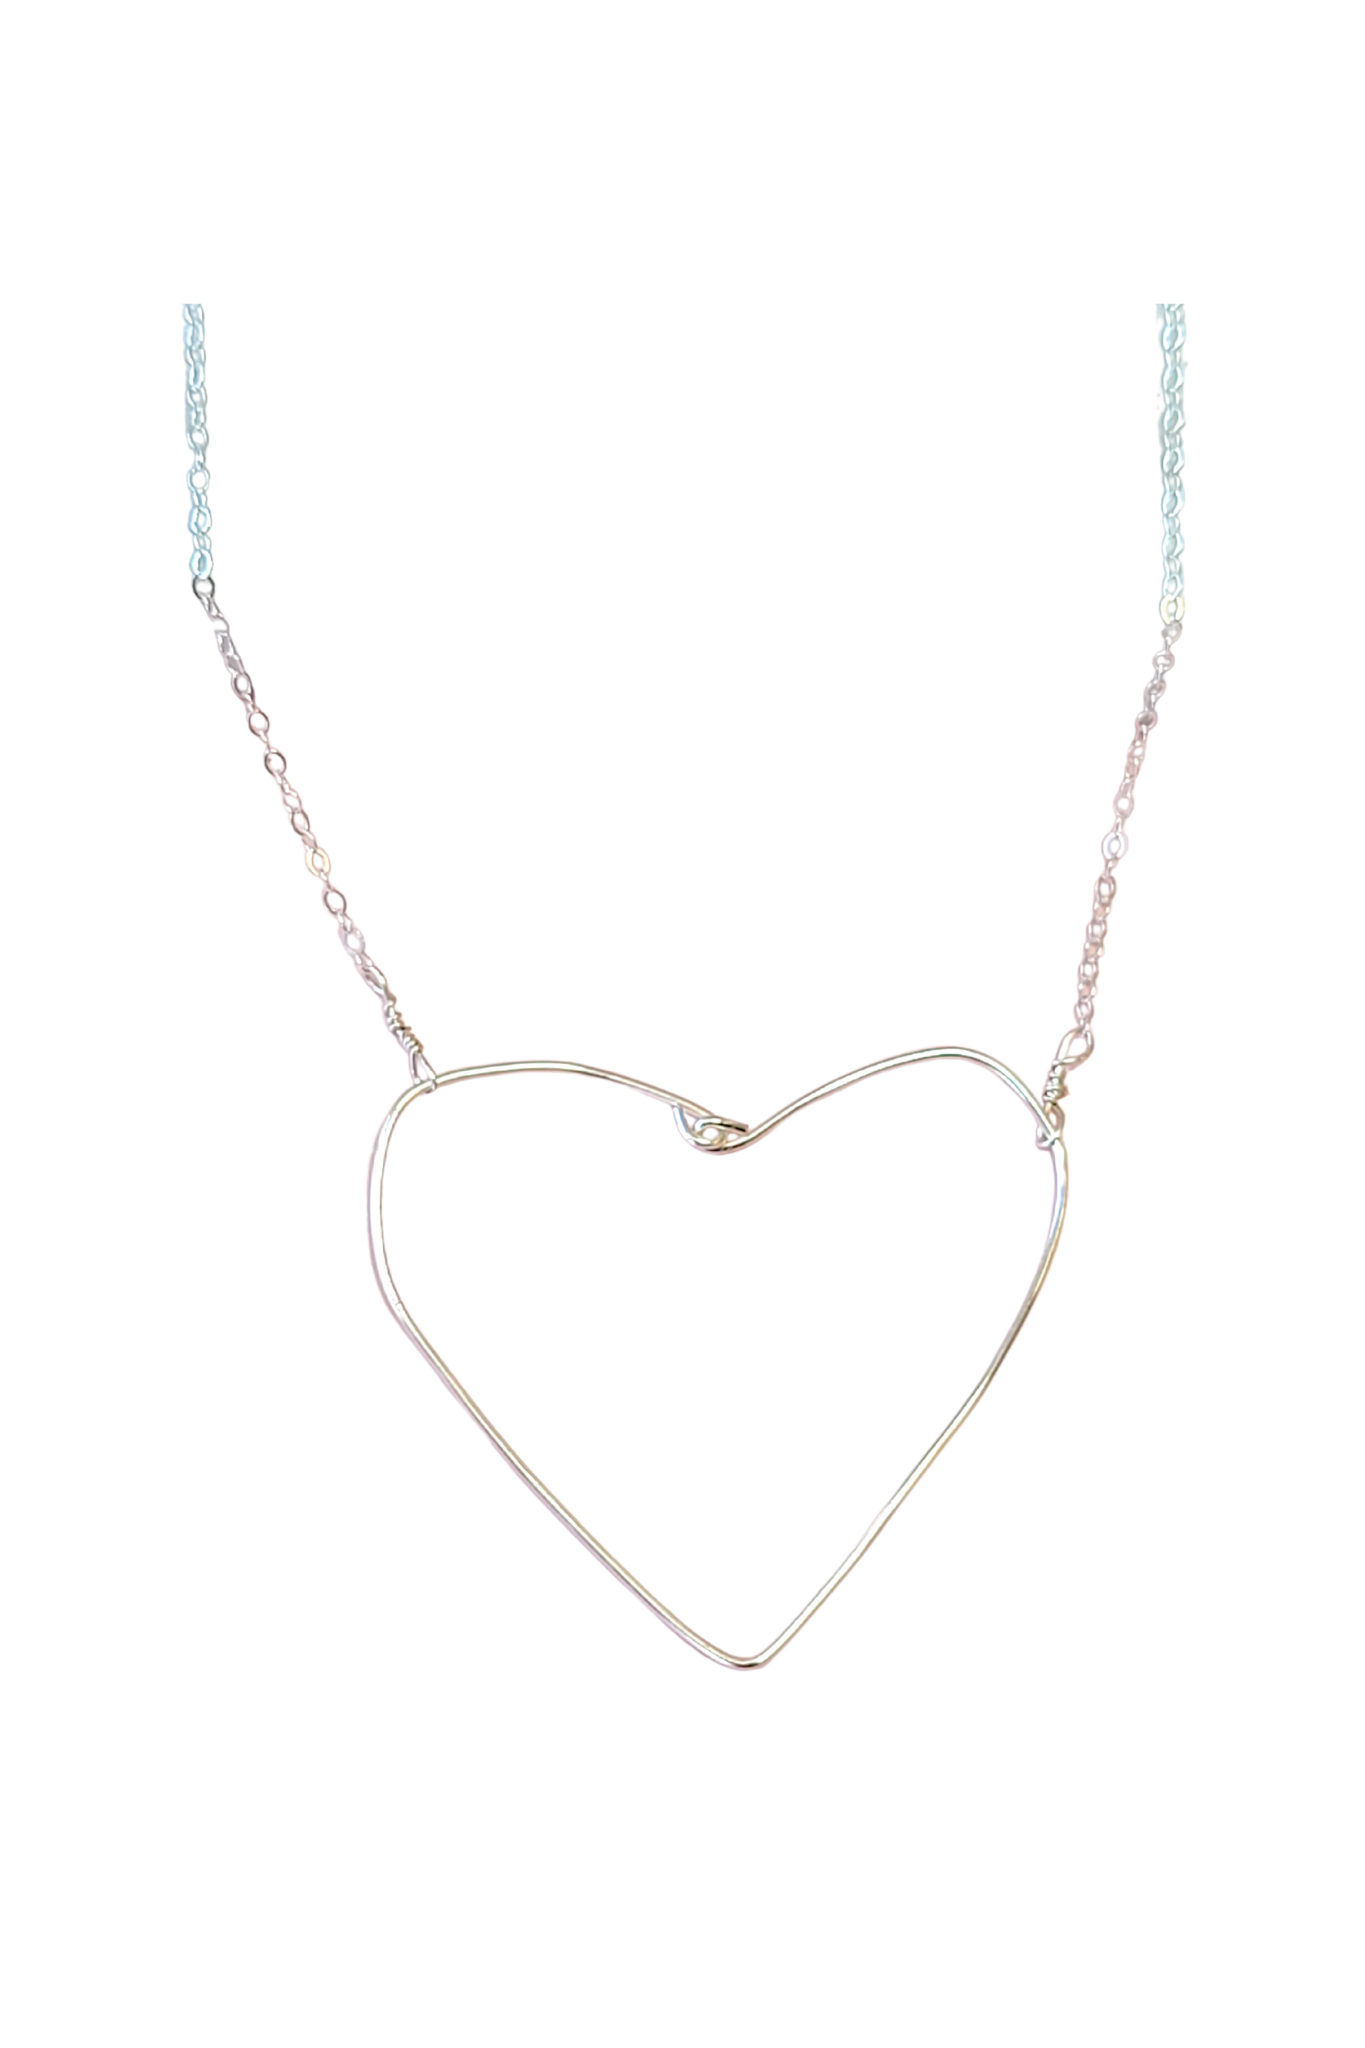 Simple Heart Necklace in Silver